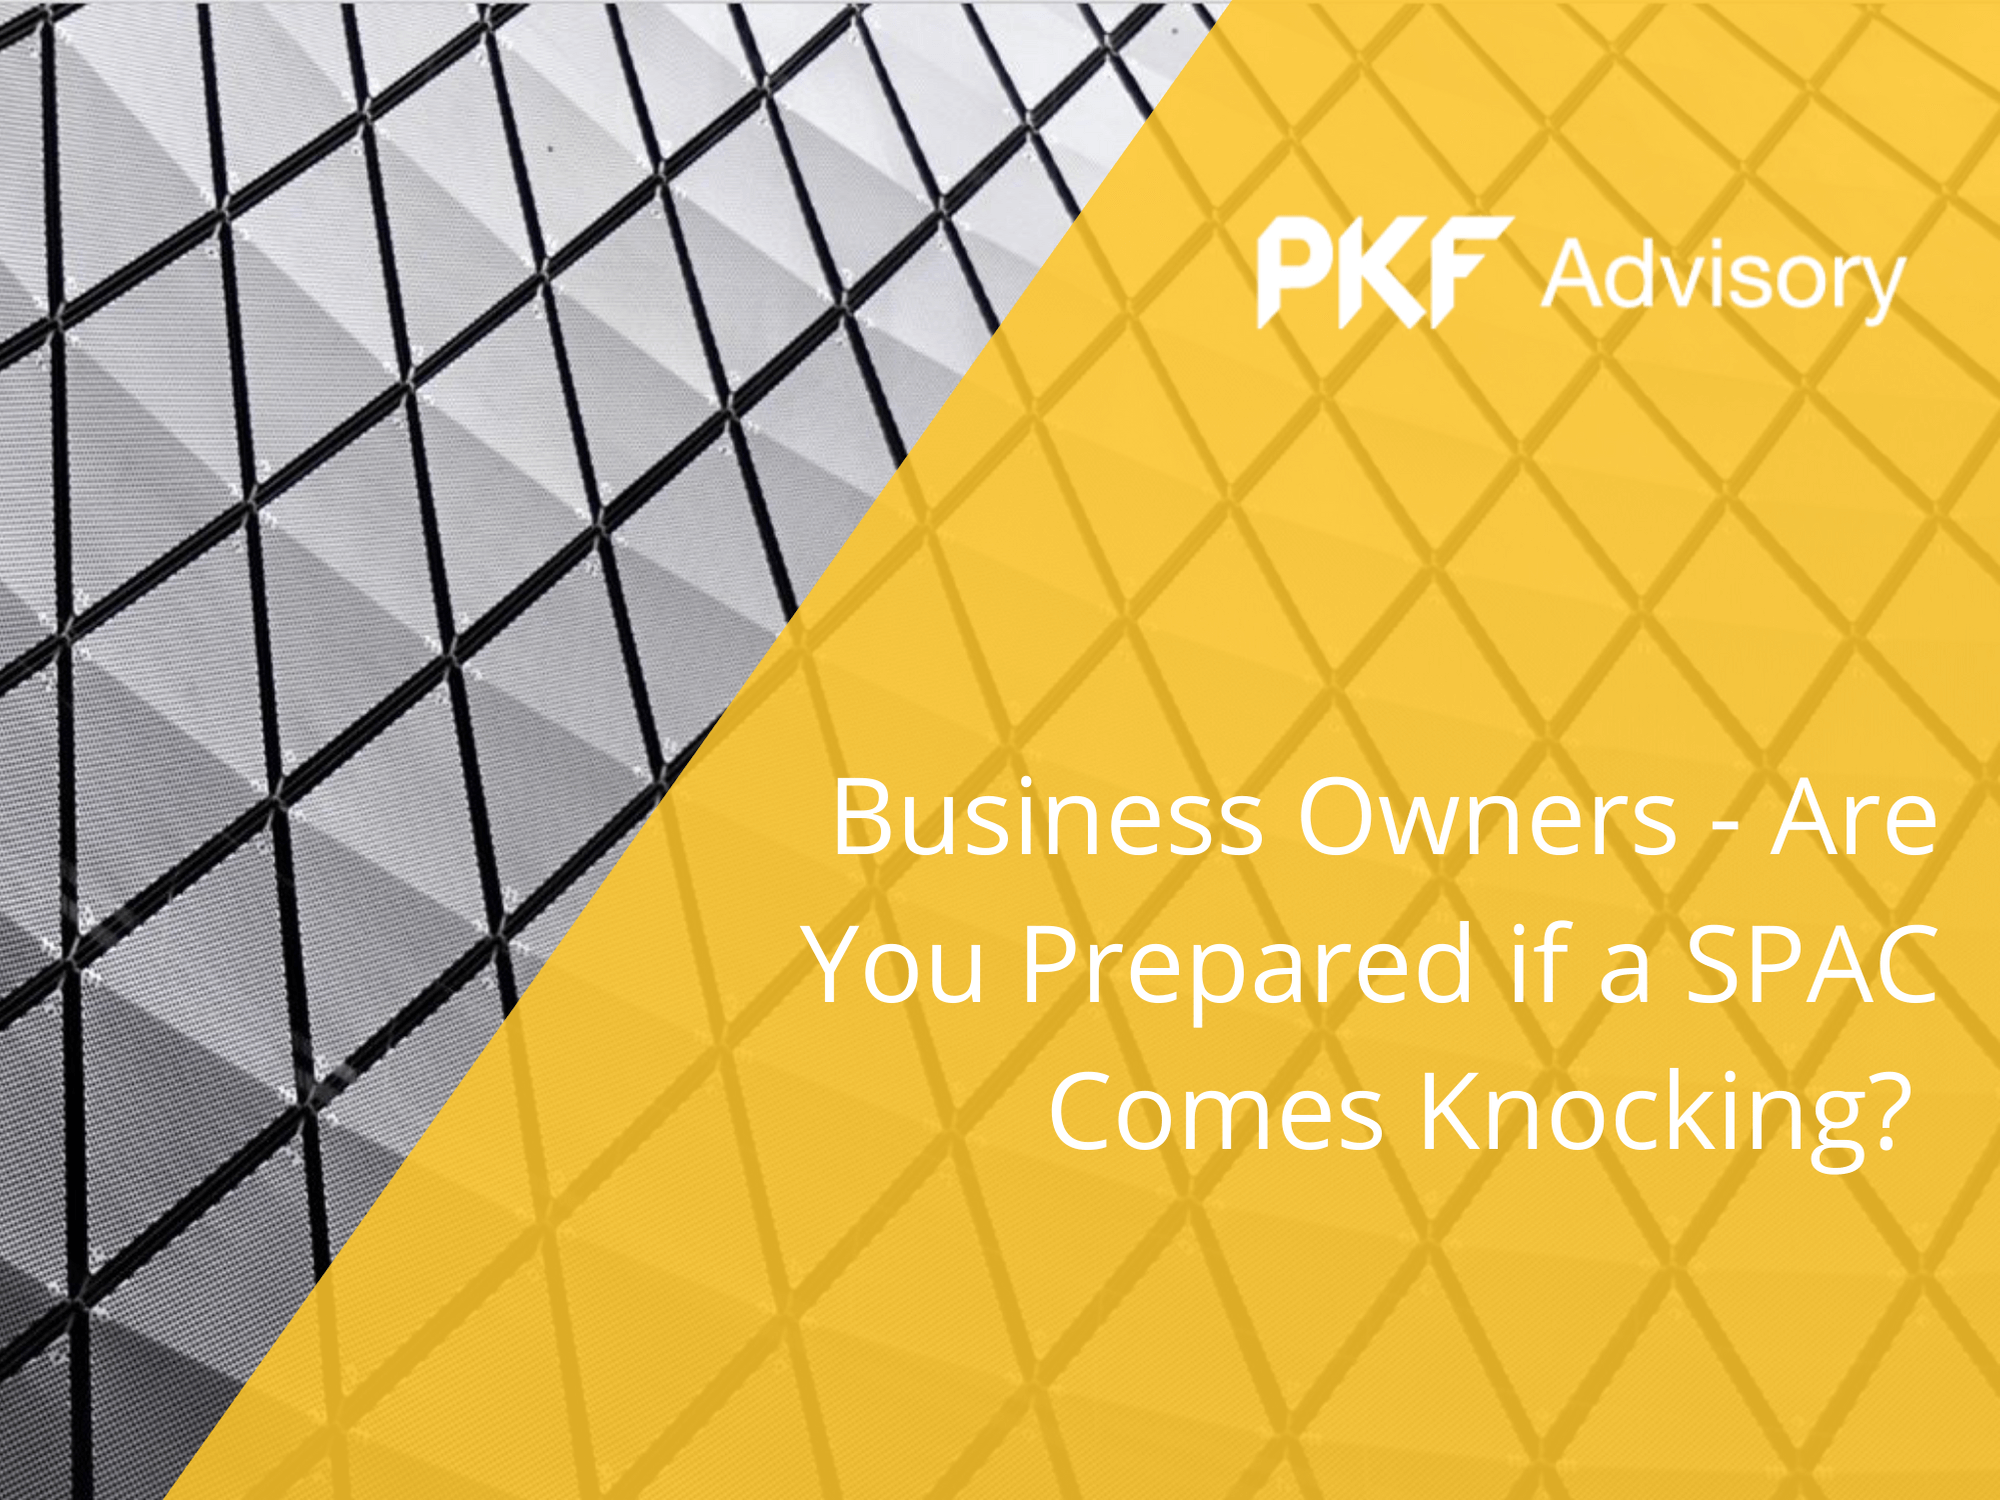 Business Owners - Are You Prepares if a SPAC Comes Knocking?